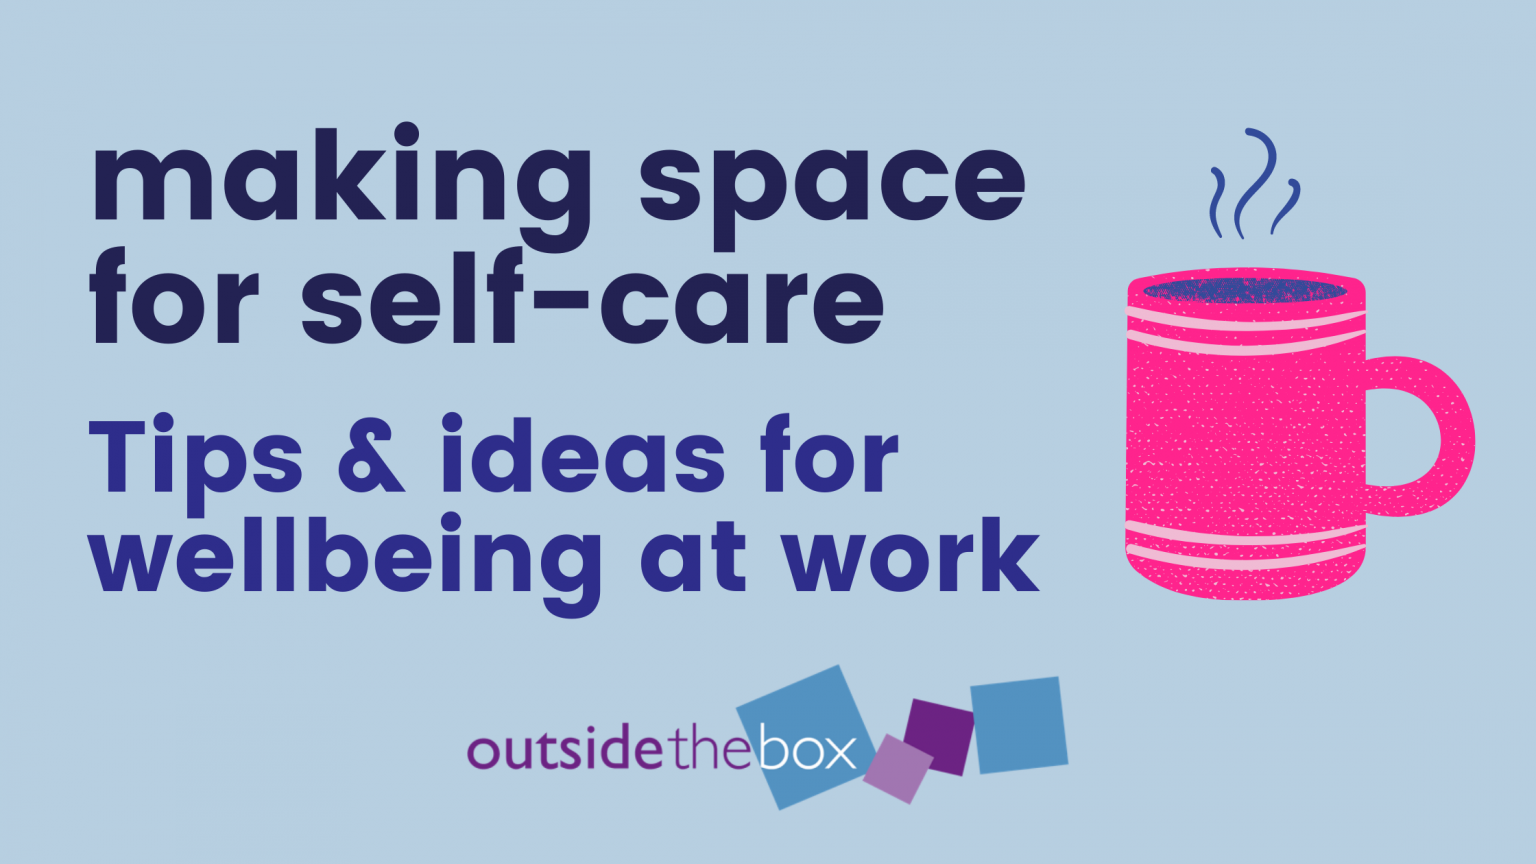 Making space for self-care - tips and ideas for wellbeing at work